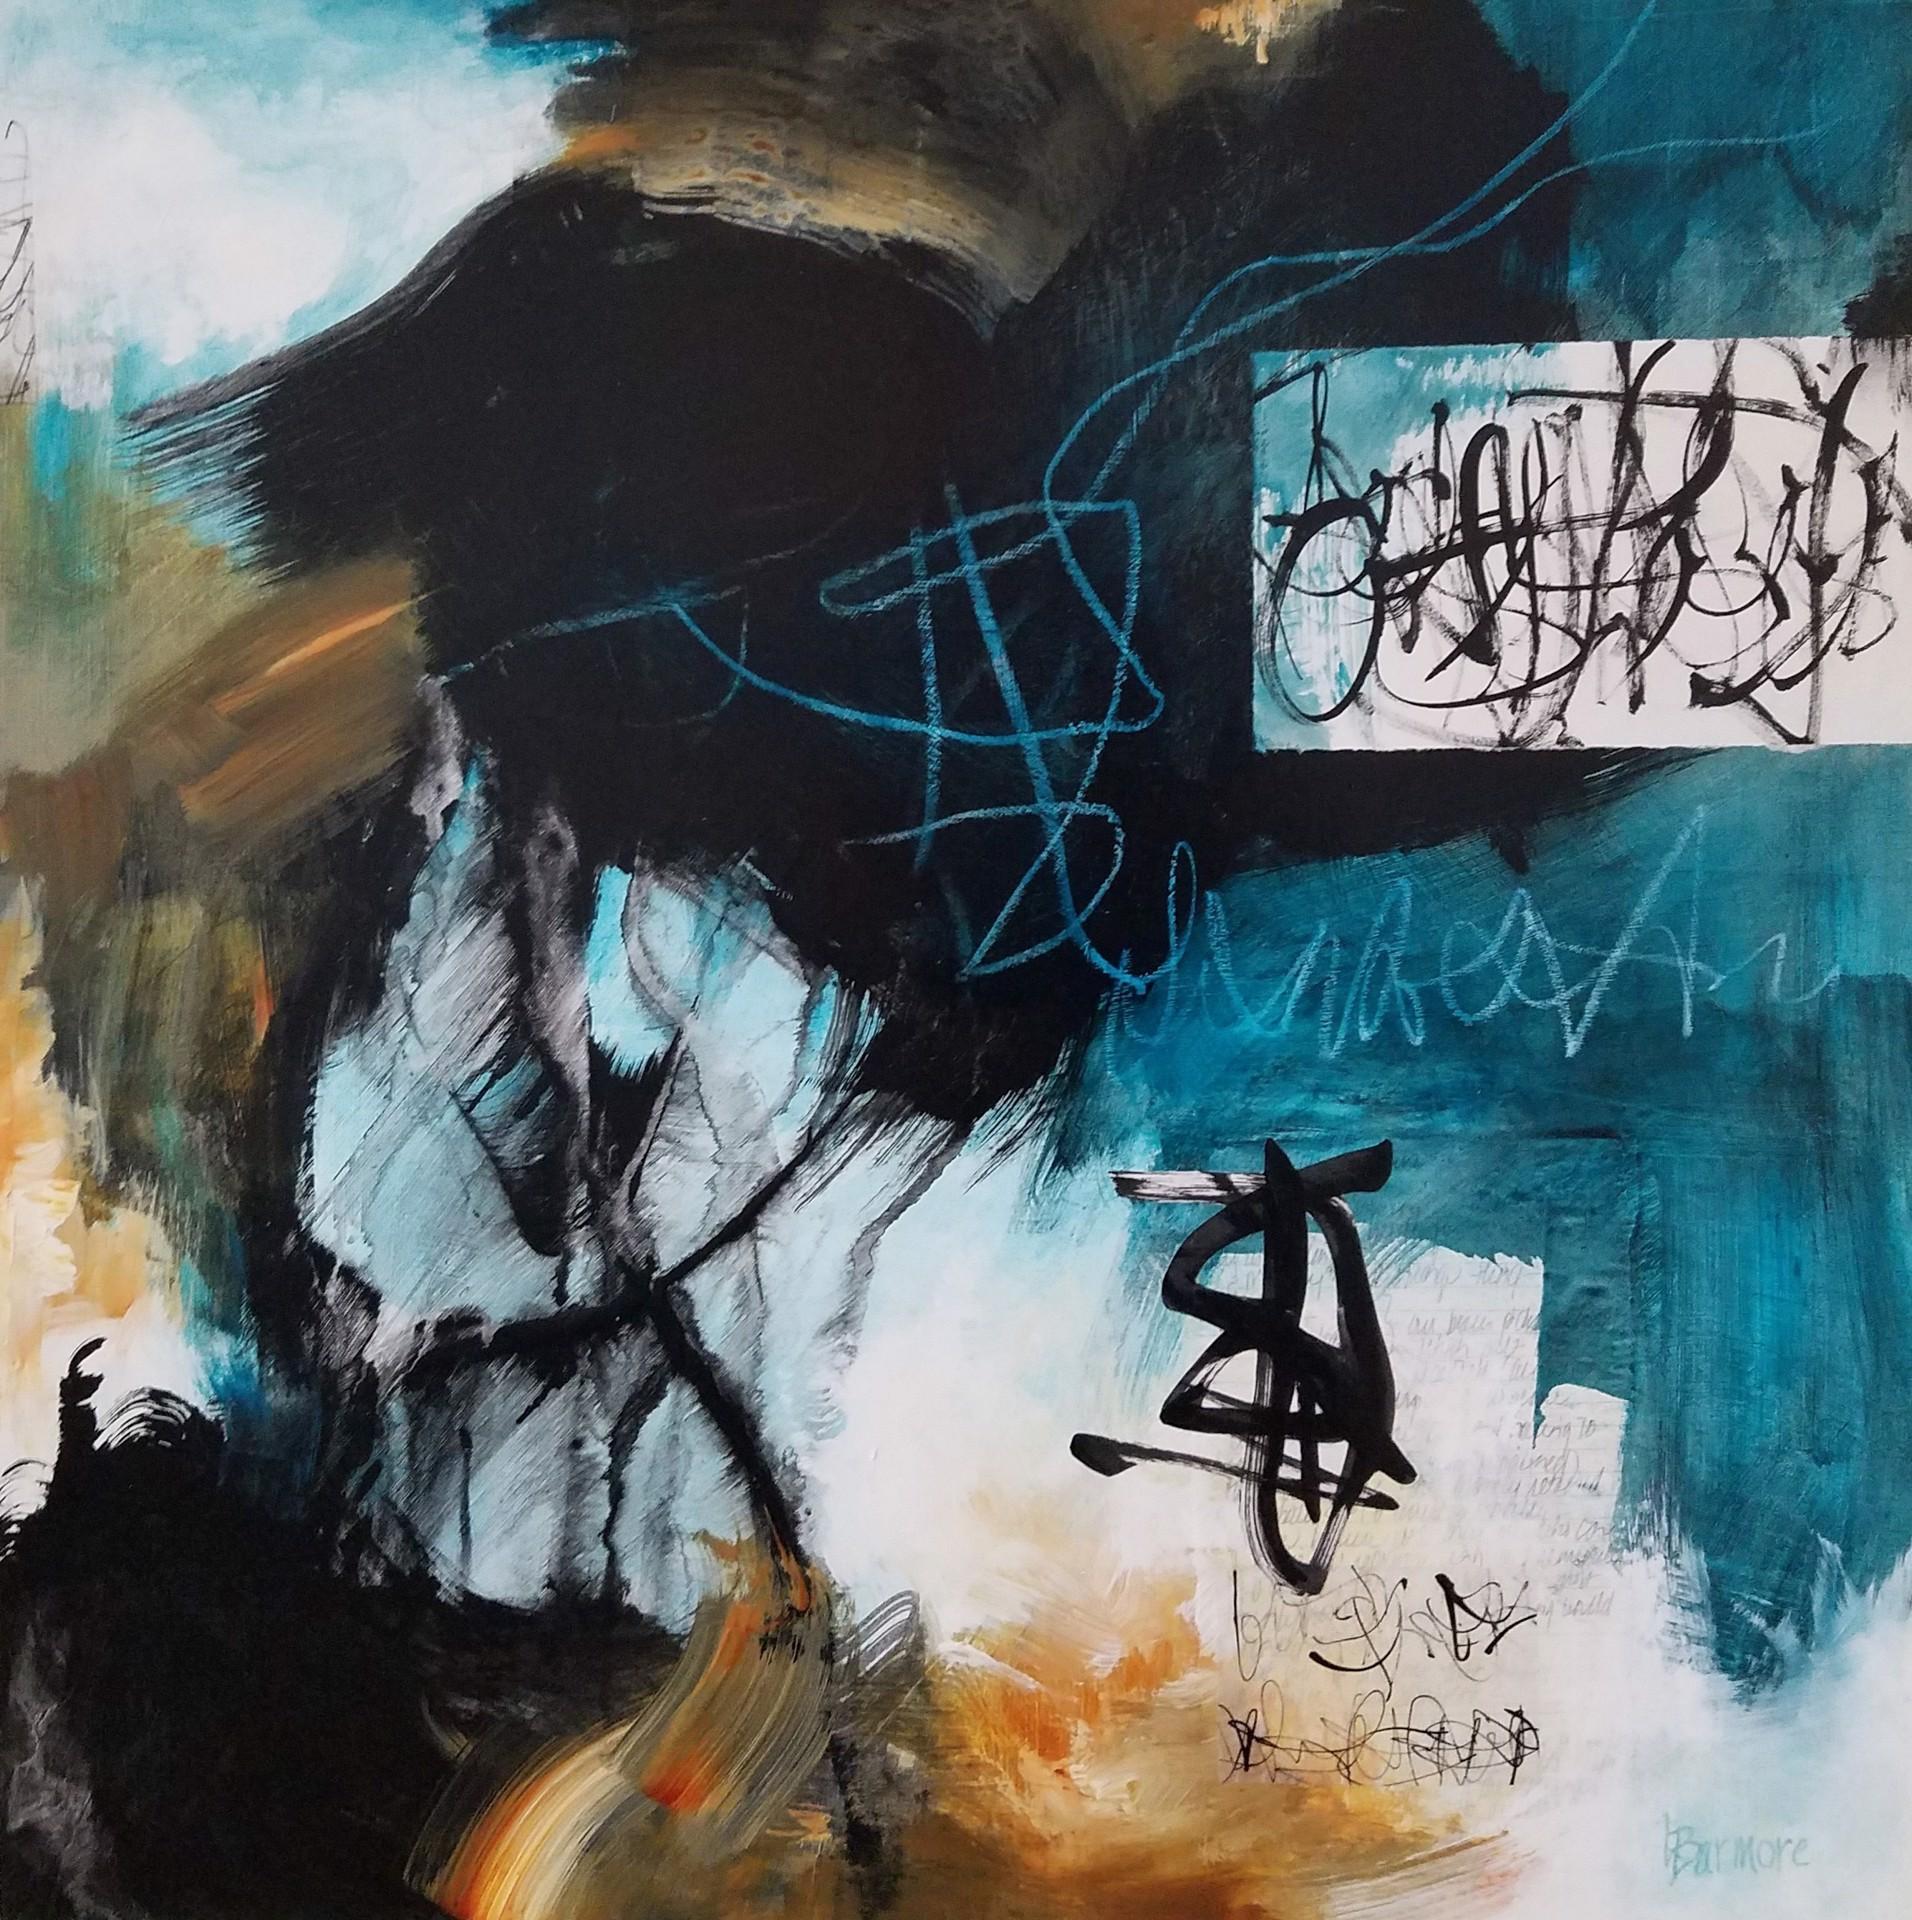 Laurie Barmore Abstract Painting - The Stories that Create Us #9, 2021 Mixed Media Painting in Teal, Orange & Black